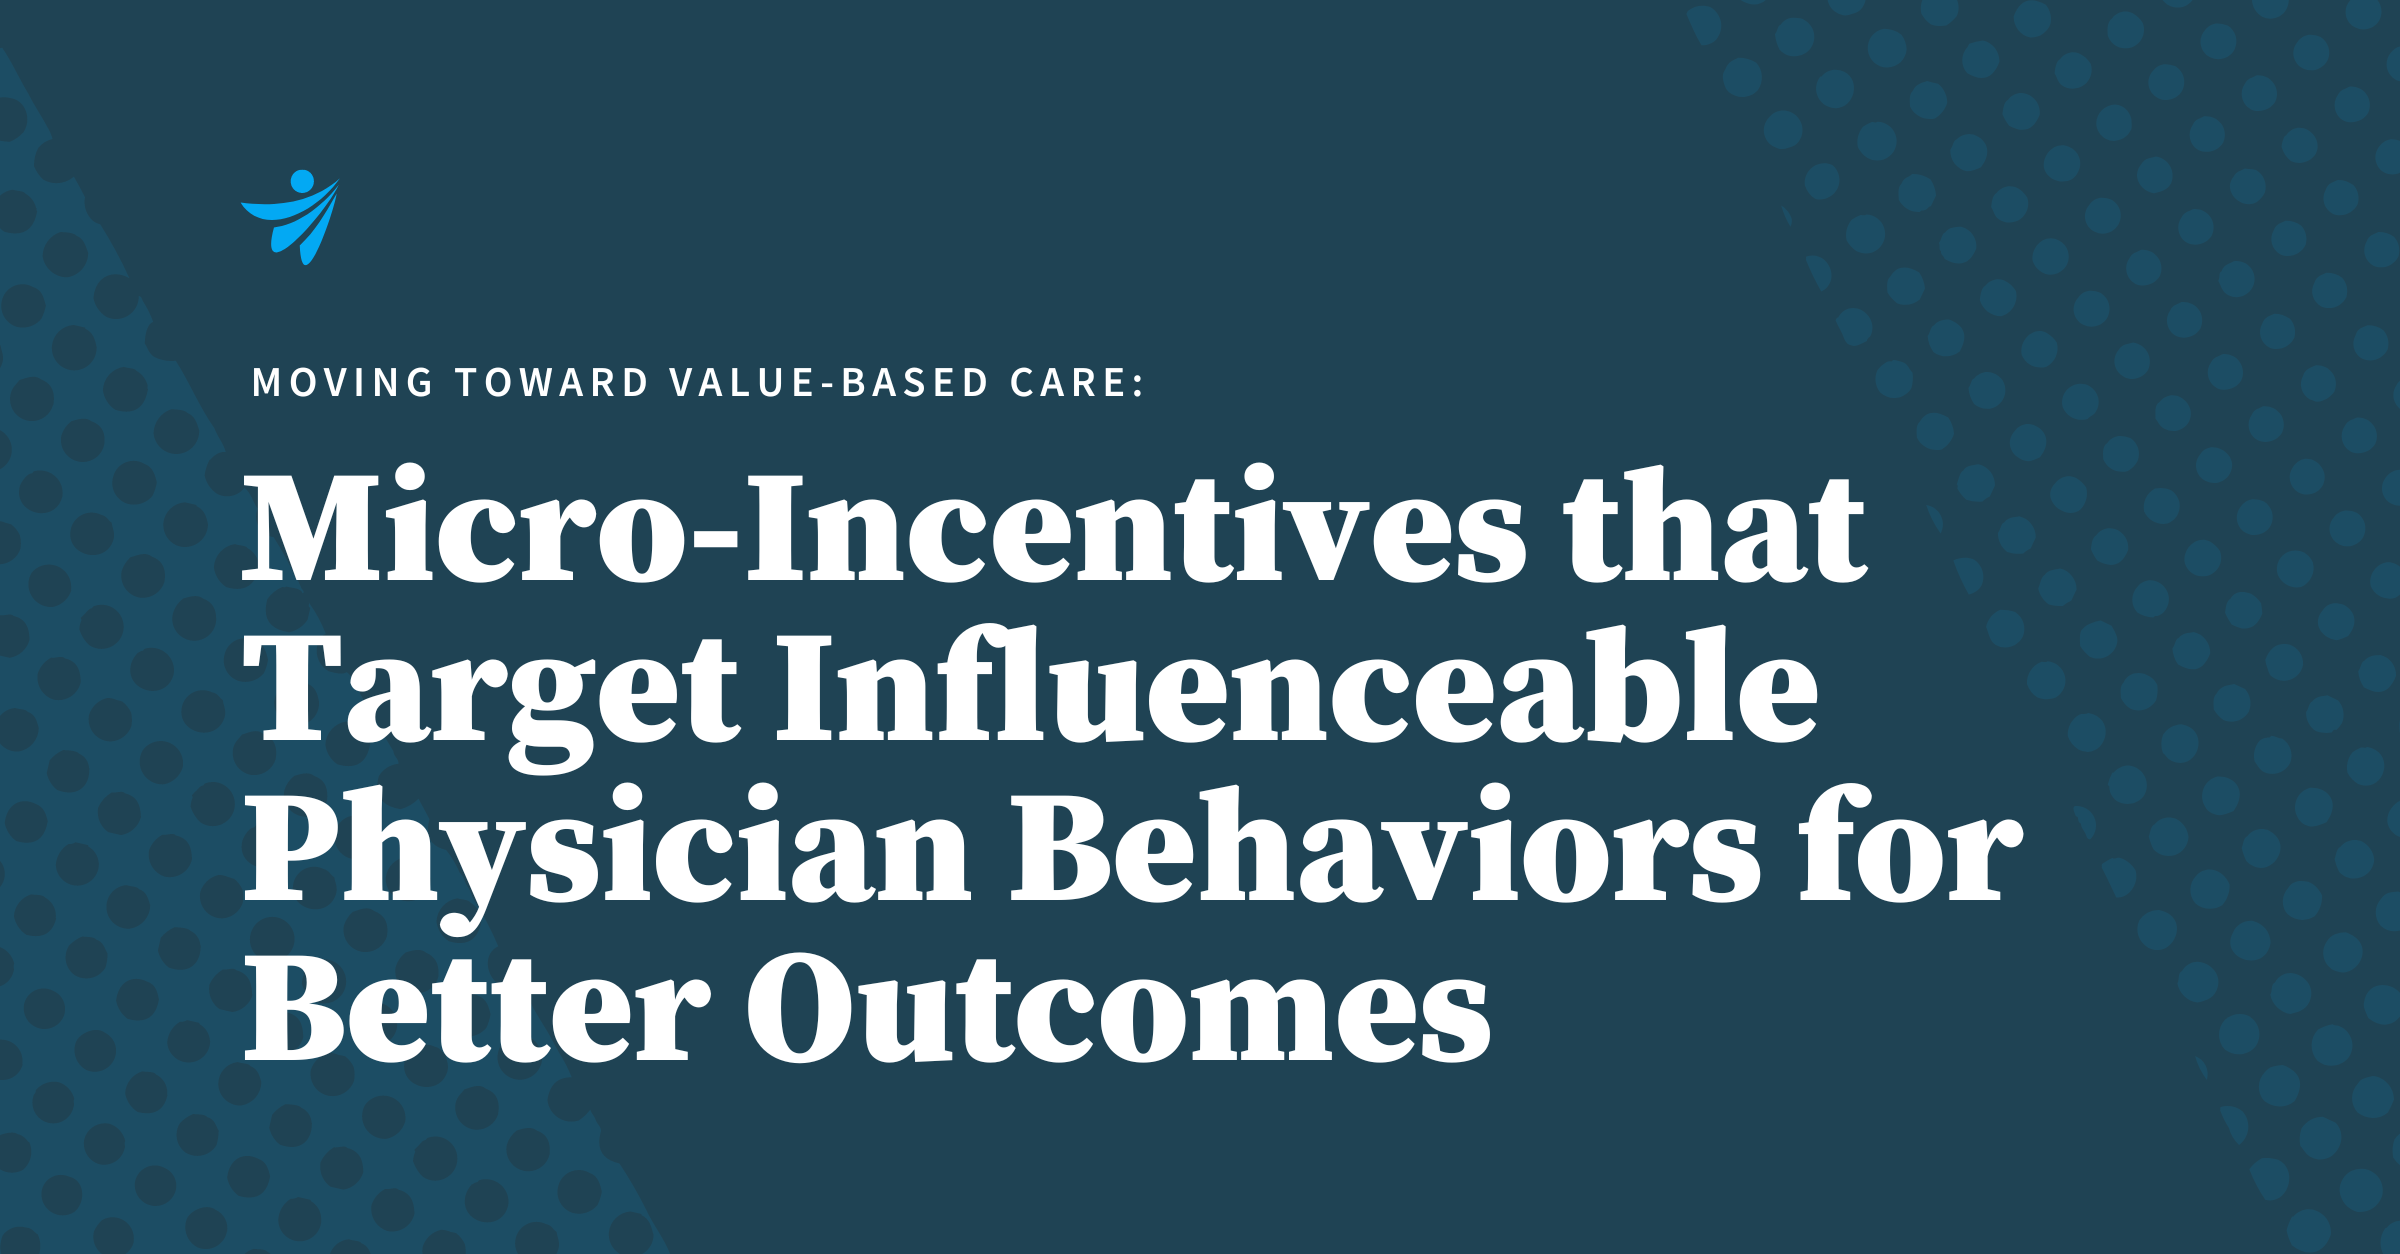 Thumbnail for Moving Toward Value-Based Care: Micro-Incentives that Target Influenceable Physician Behaviors for Better Outcomes